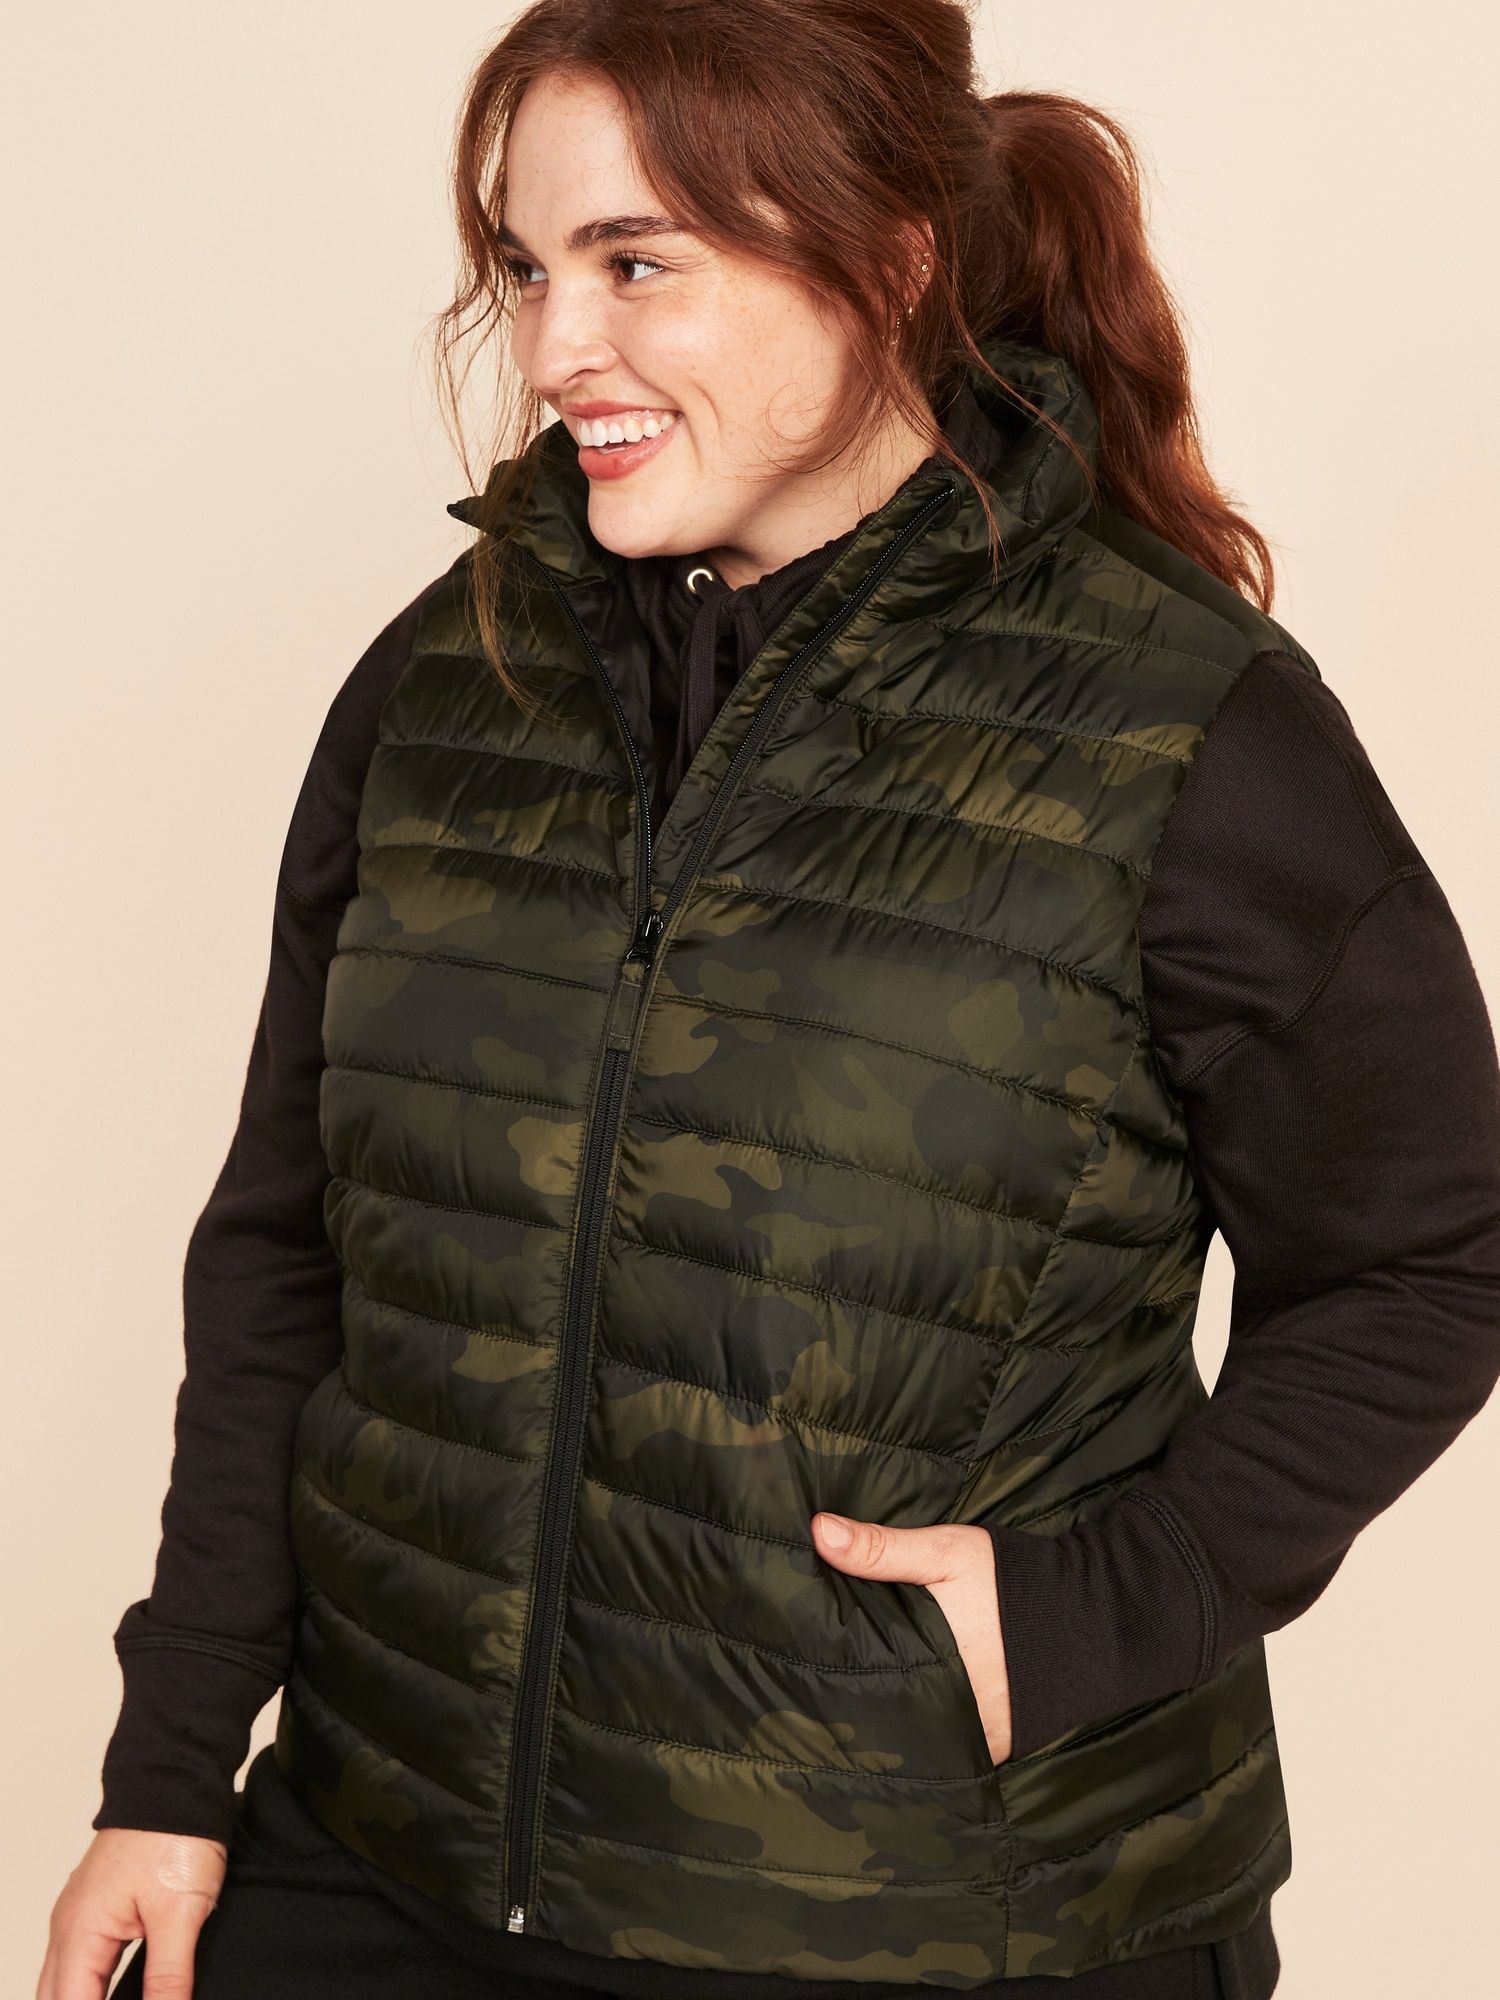 Katie Holmes Wore the Puffer Vest Trend That's Heating Up | Who What Wear